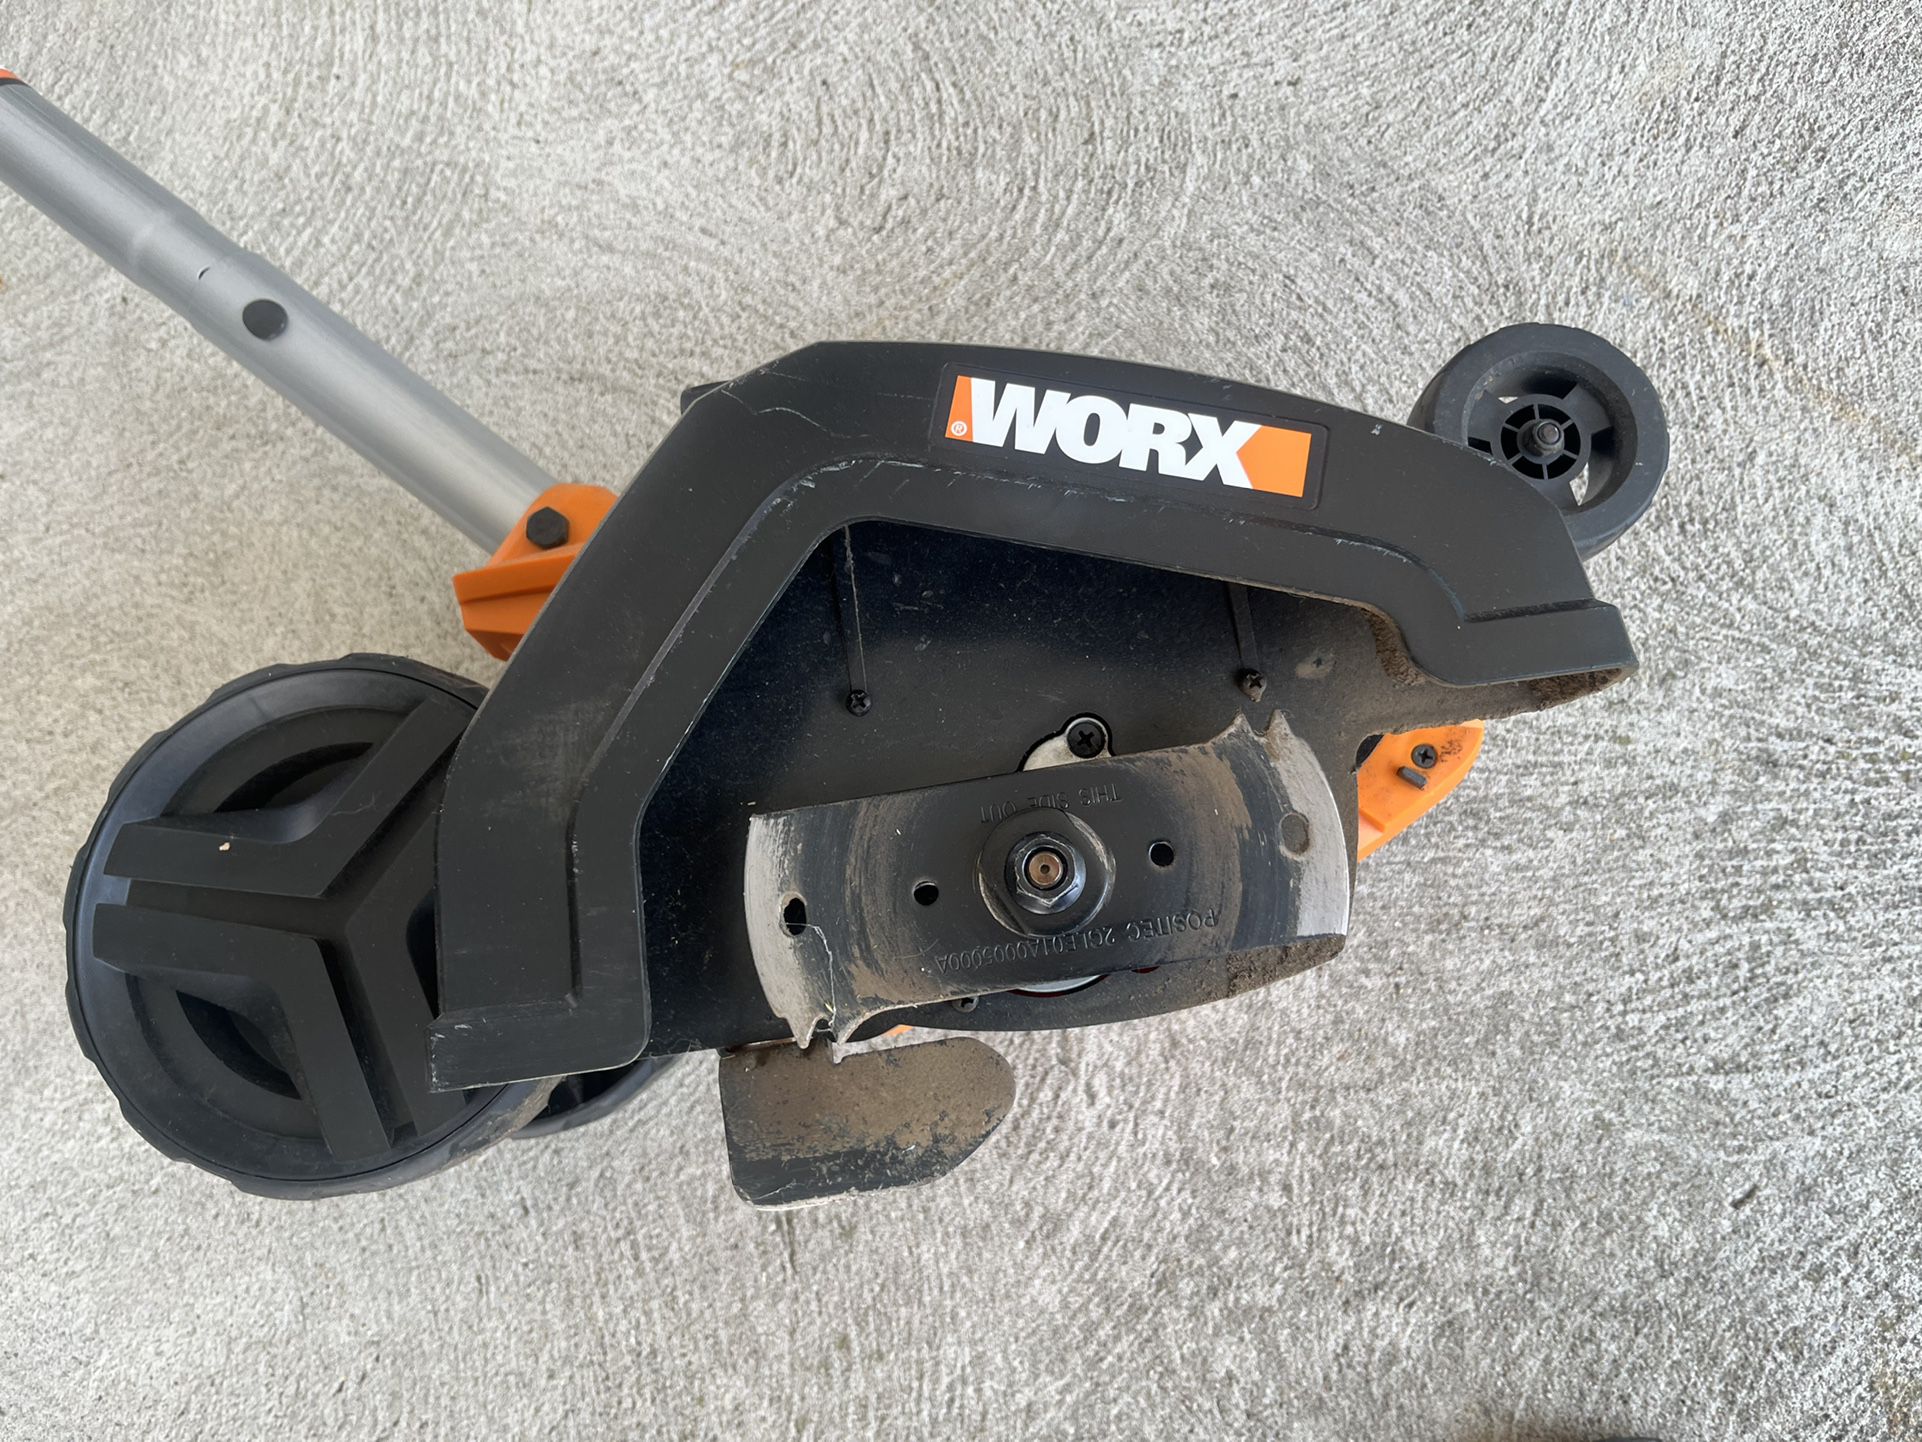 Worx WG896 12-Amp Electric Lawn Edger 4.6 (570) Main Results Image Carousel 